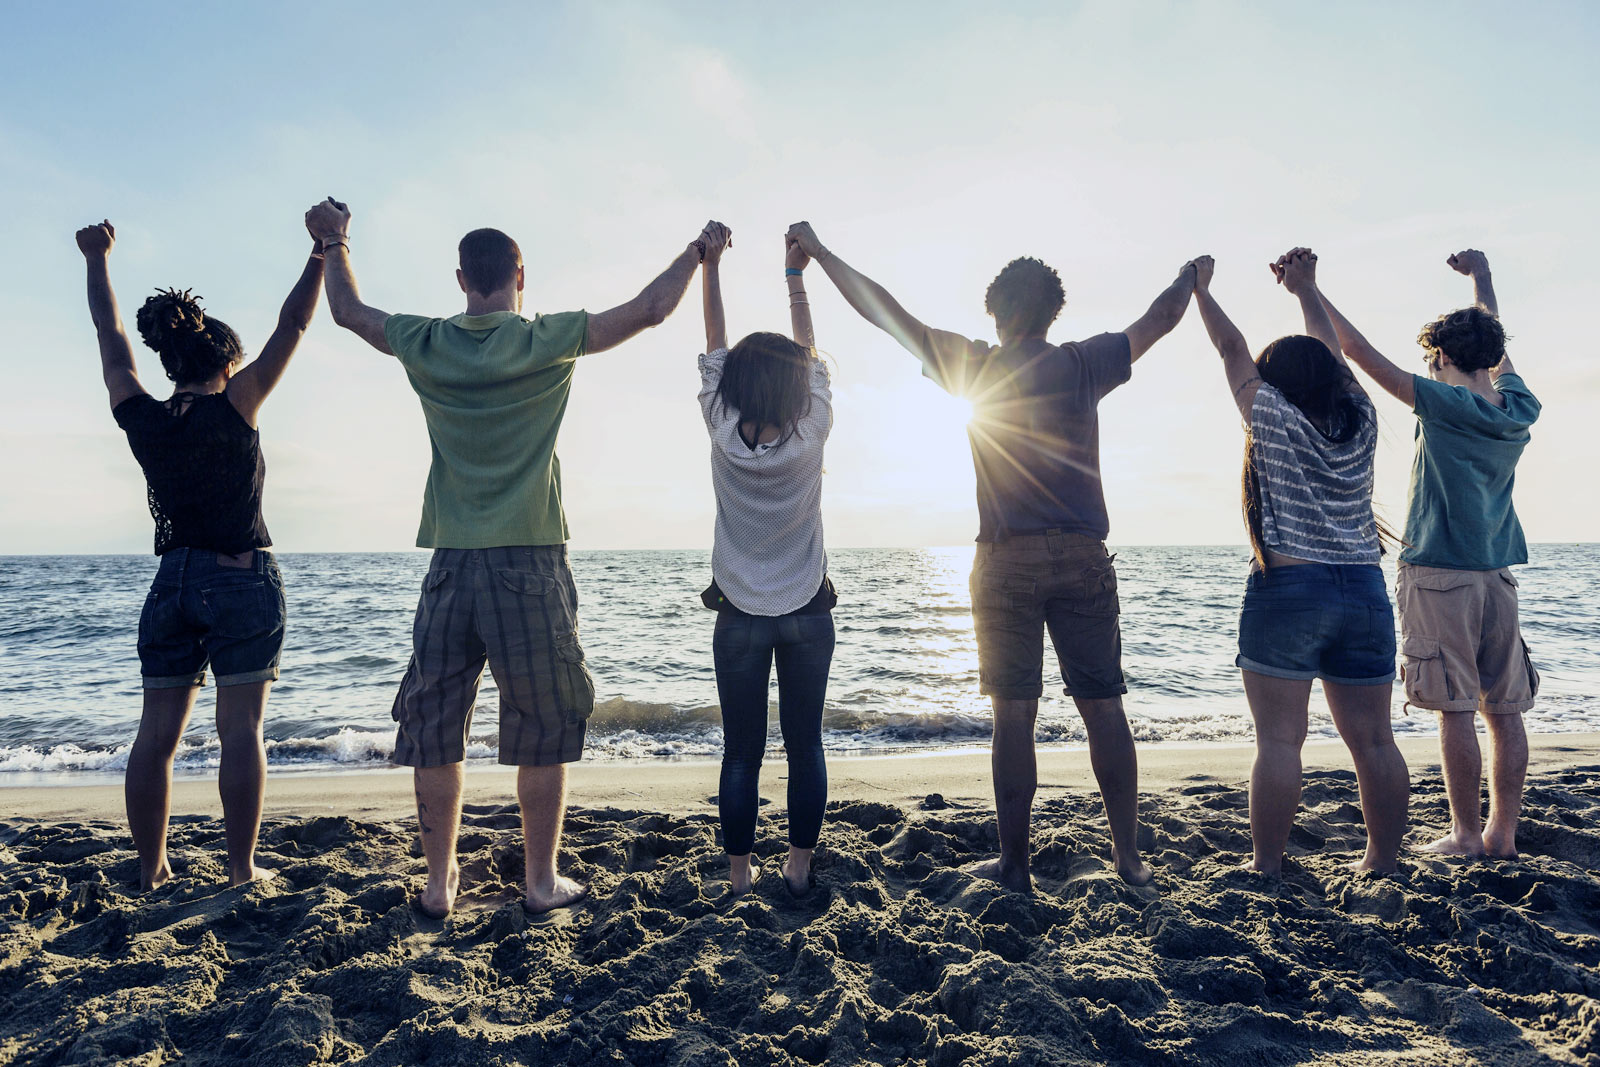 support group holding each other's hands up facing the ocean